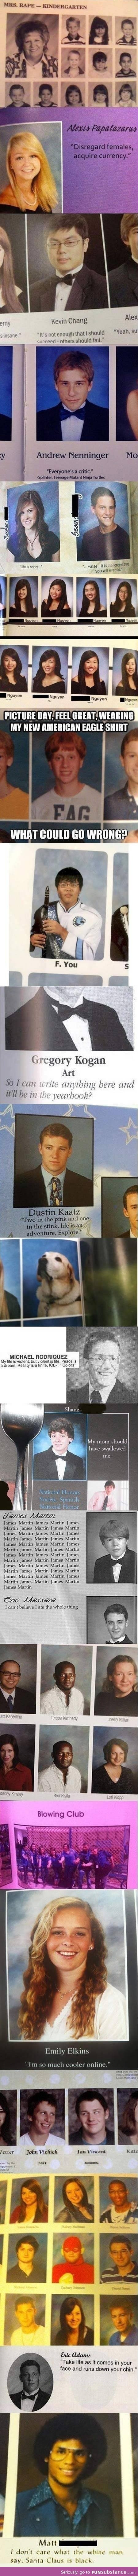 Funny yearbook compilation